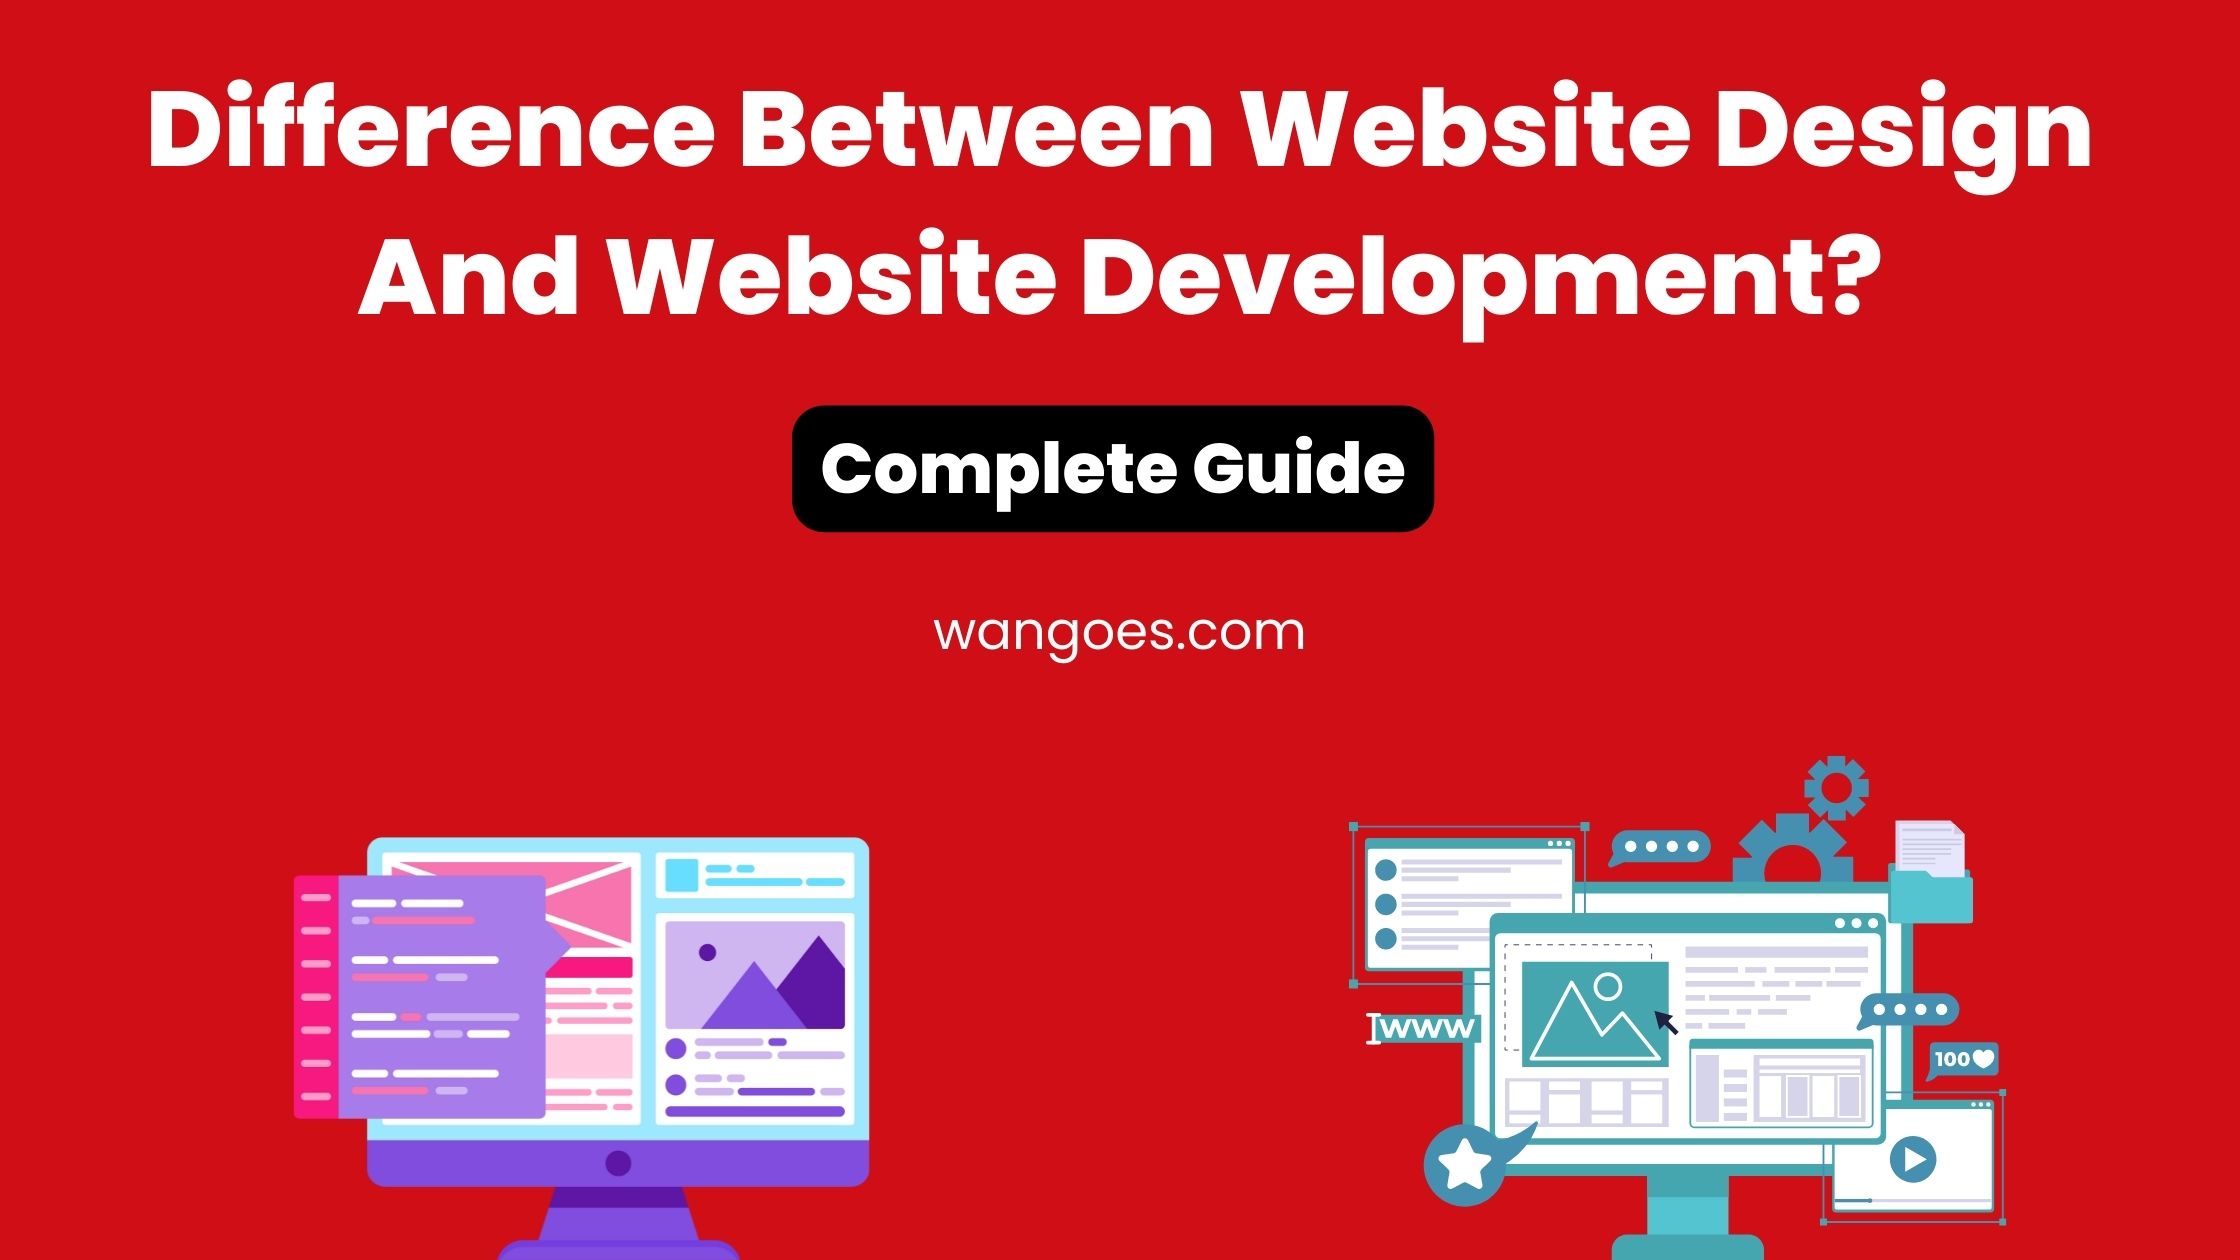 What Is The Difference Between Website Design And Website Development?